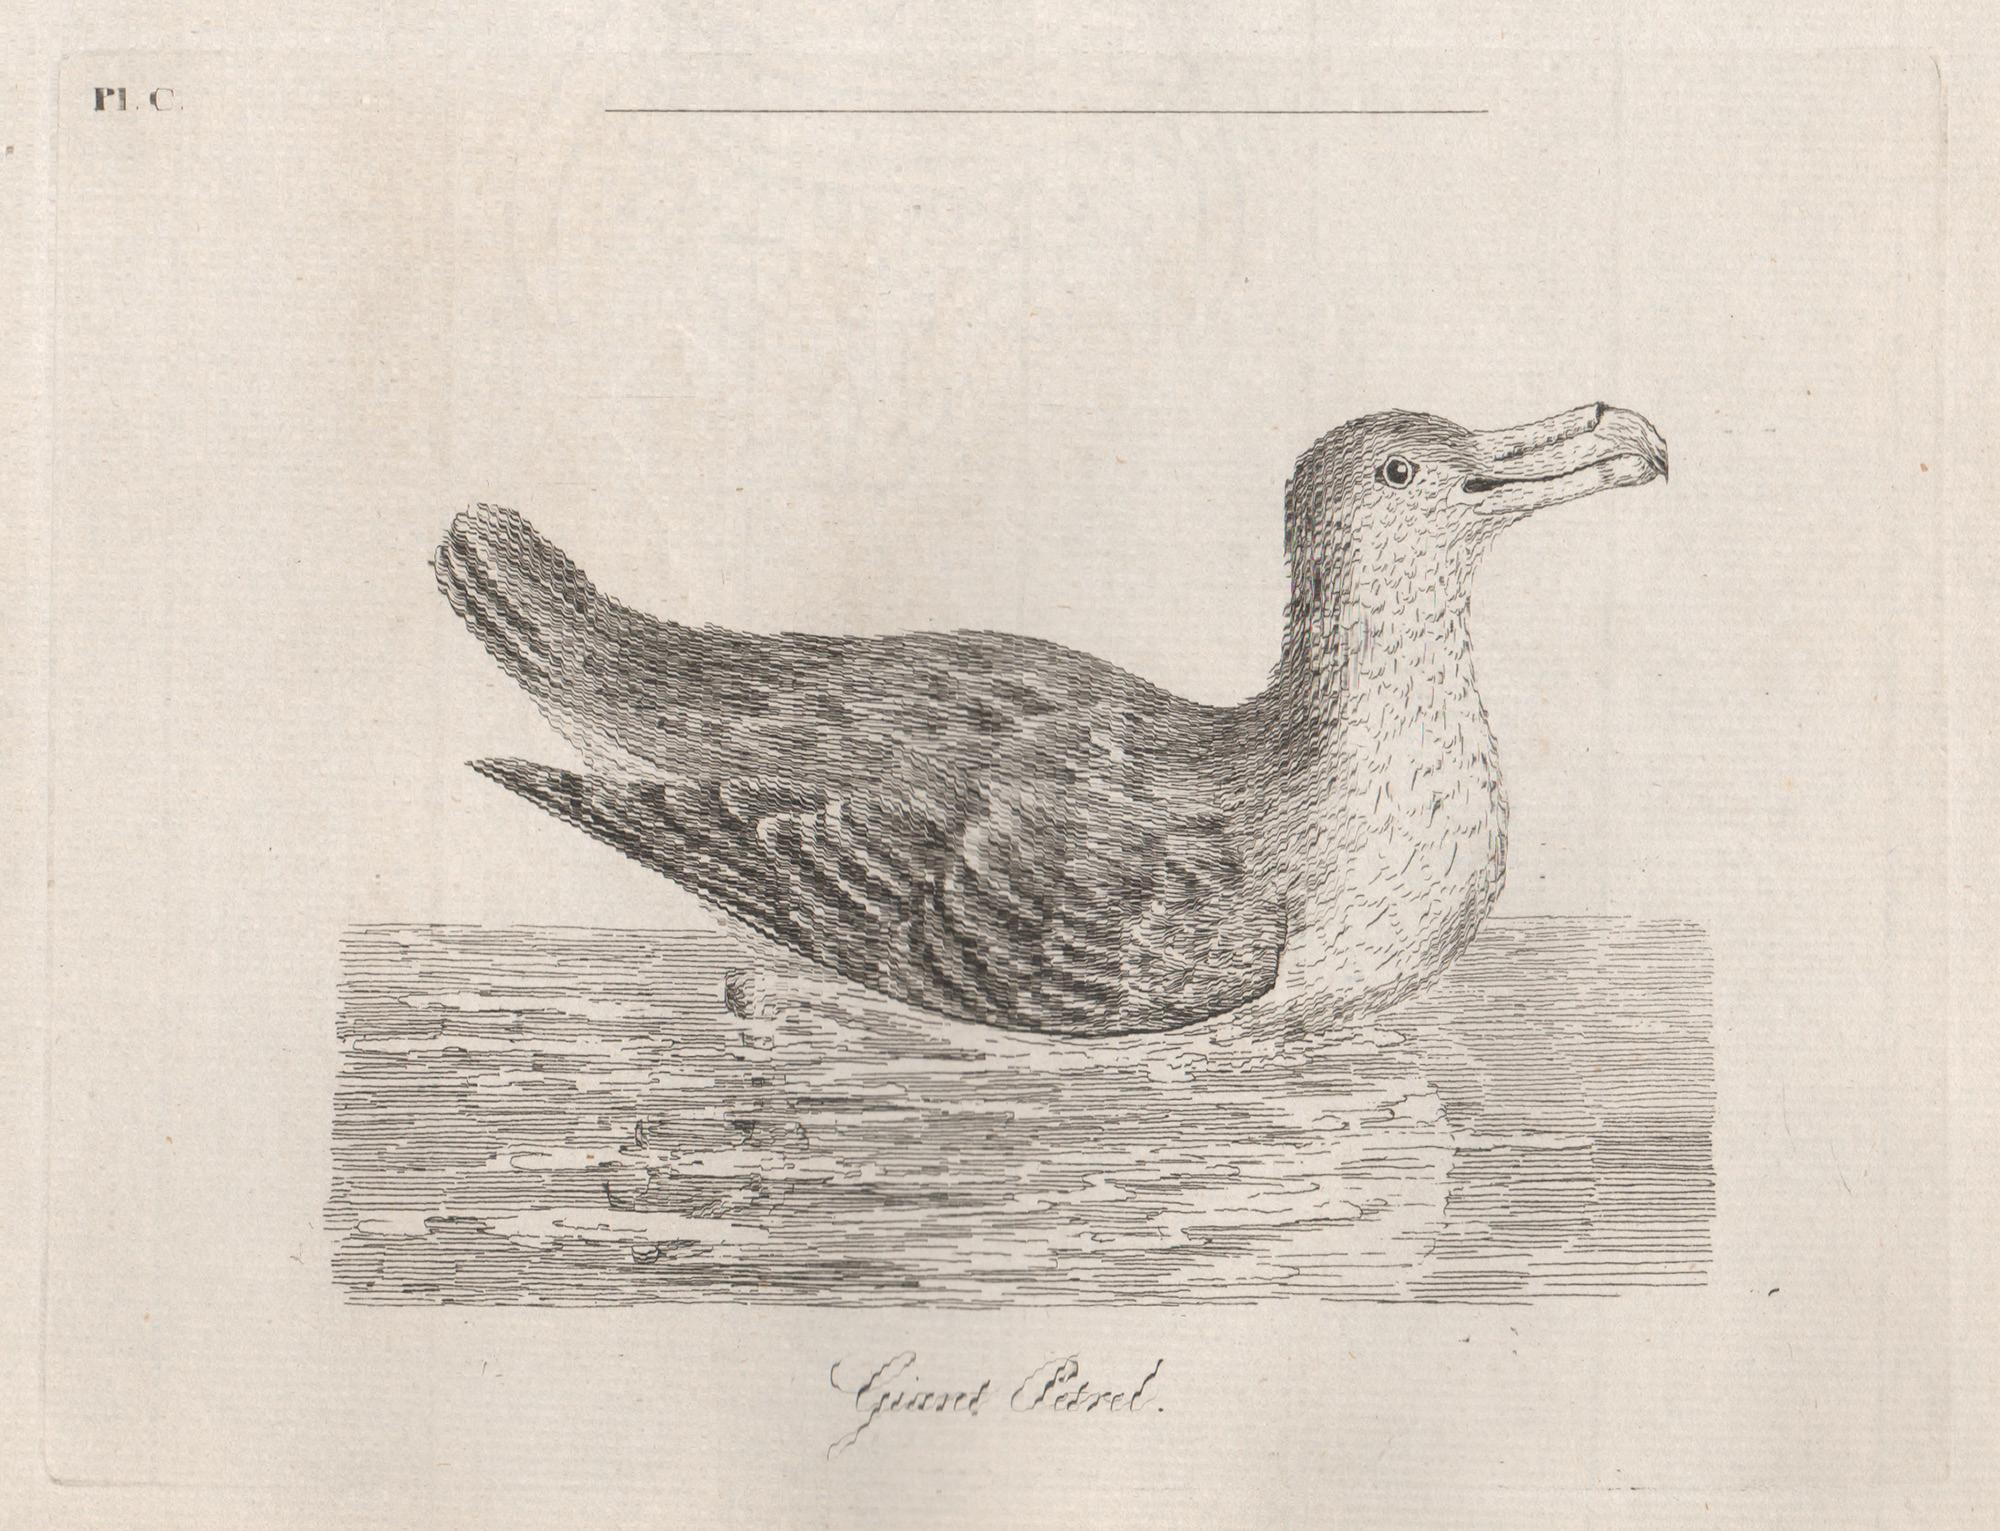 Copper-line engraving. 1781. From John Latham's 'General Synopsis of Birds' 1781-1785, and its Supplements. Plate number top left. Laid paper.

John Latham was the leading English ornithologist of his day.

138mm by 180mm (platemark) 
180mm by 240mm